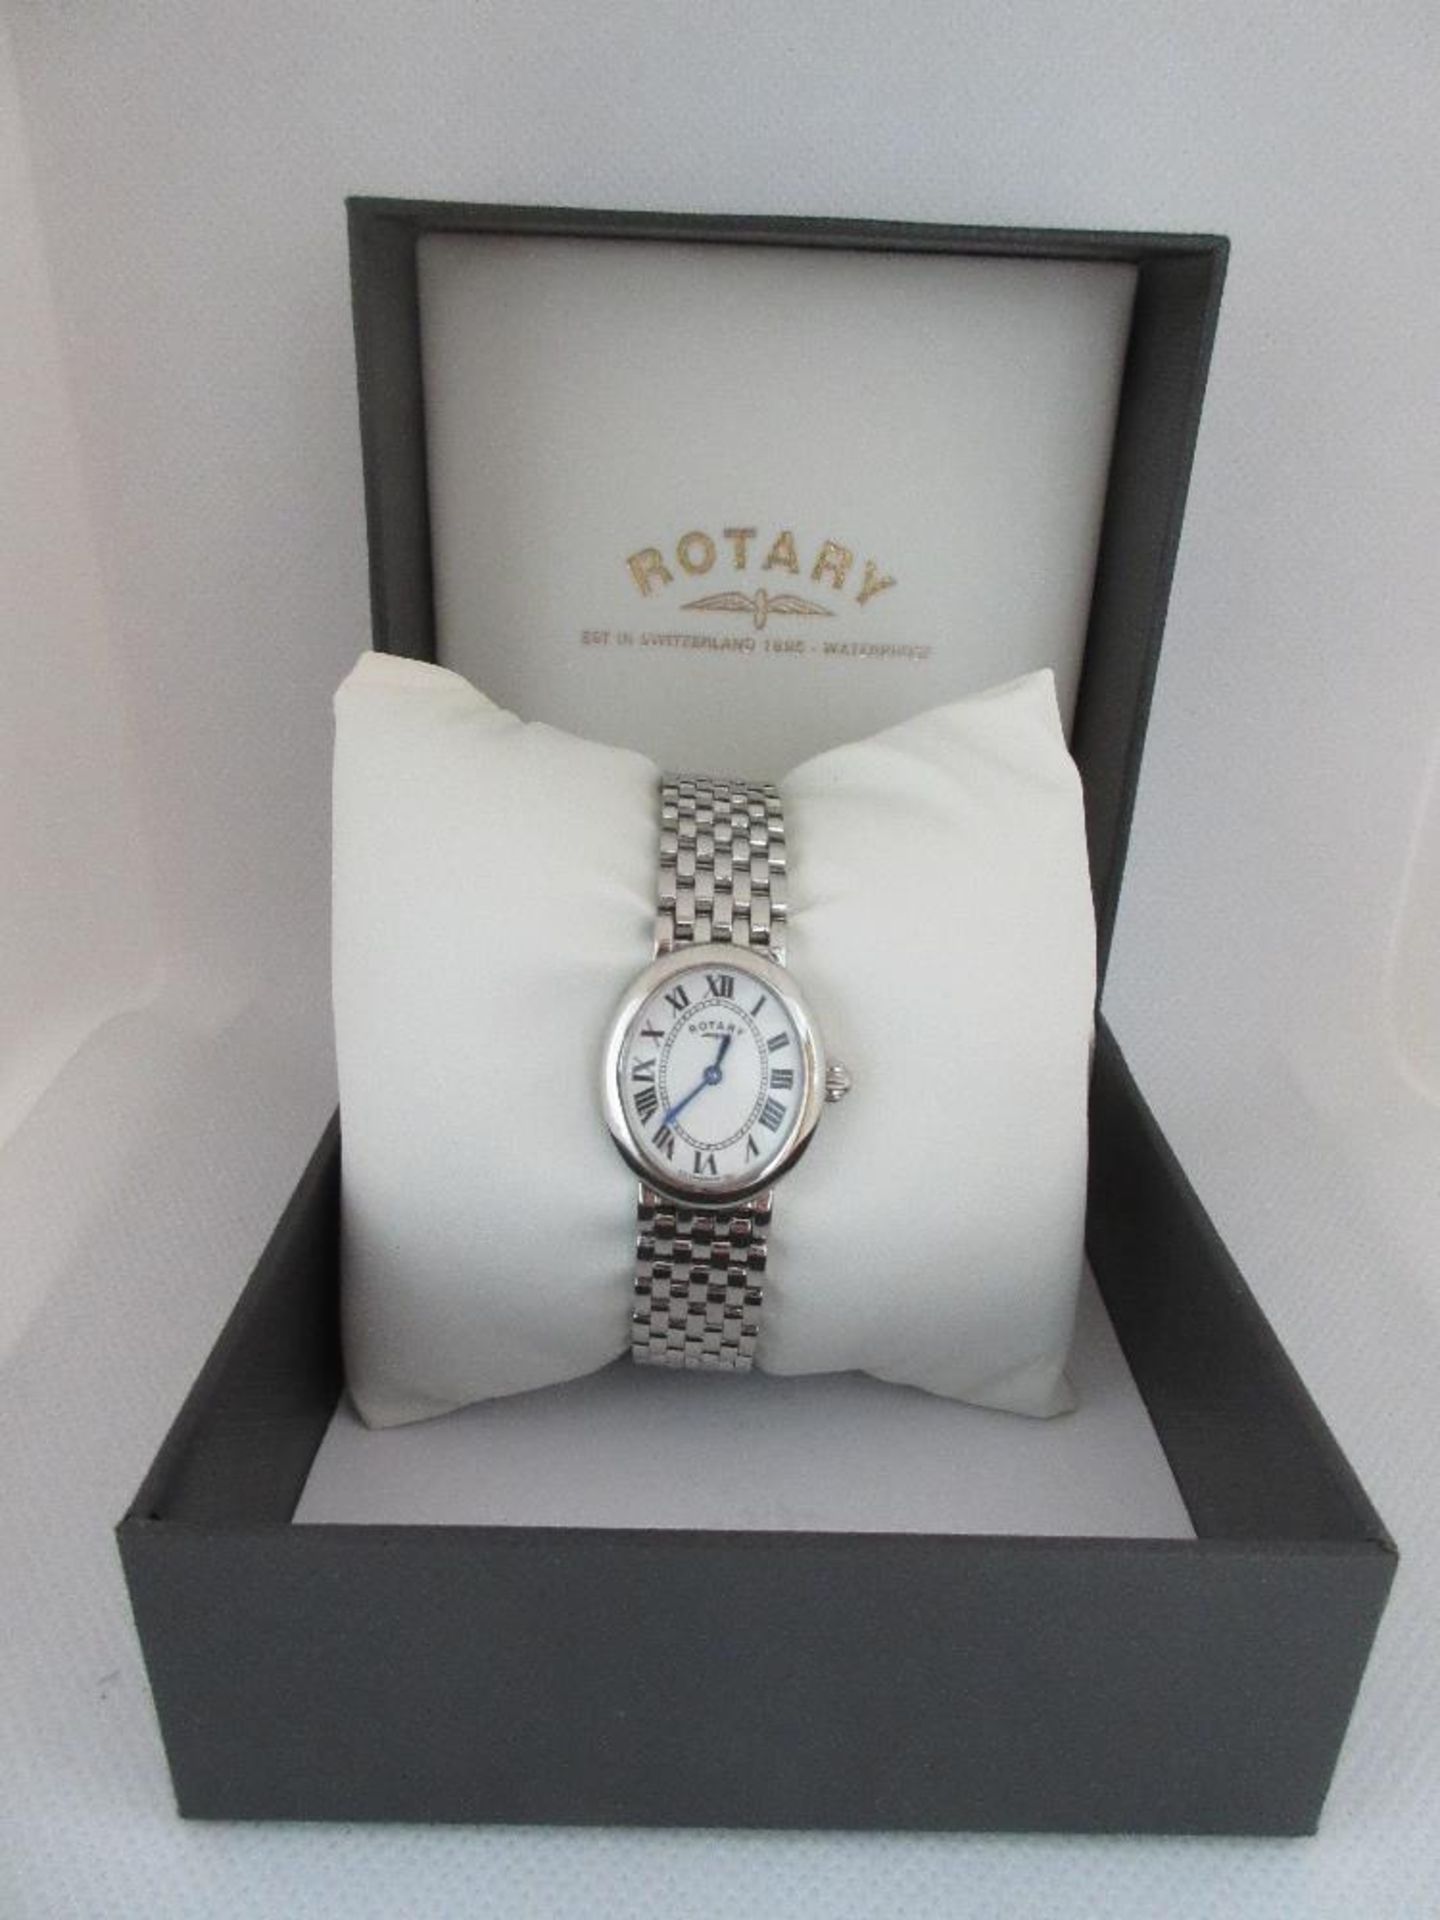 ROTARY FEMALE WATCH, MODEL LB02467/32, CASE DIAMETER 23MM, STAINLESS STEEL STRAP, BOXED, RRP £ 139